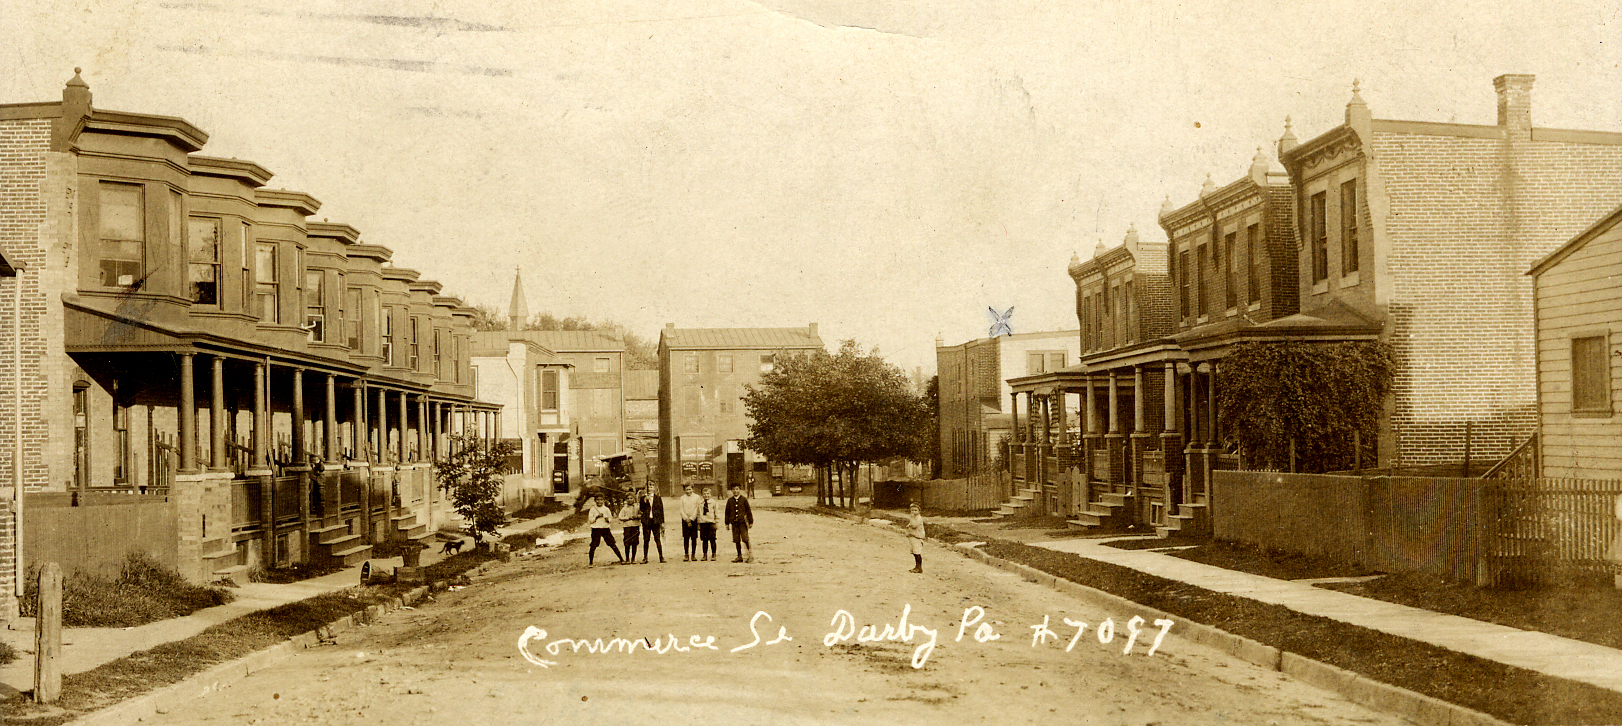 Darby Commerce St. c.1910 pcp